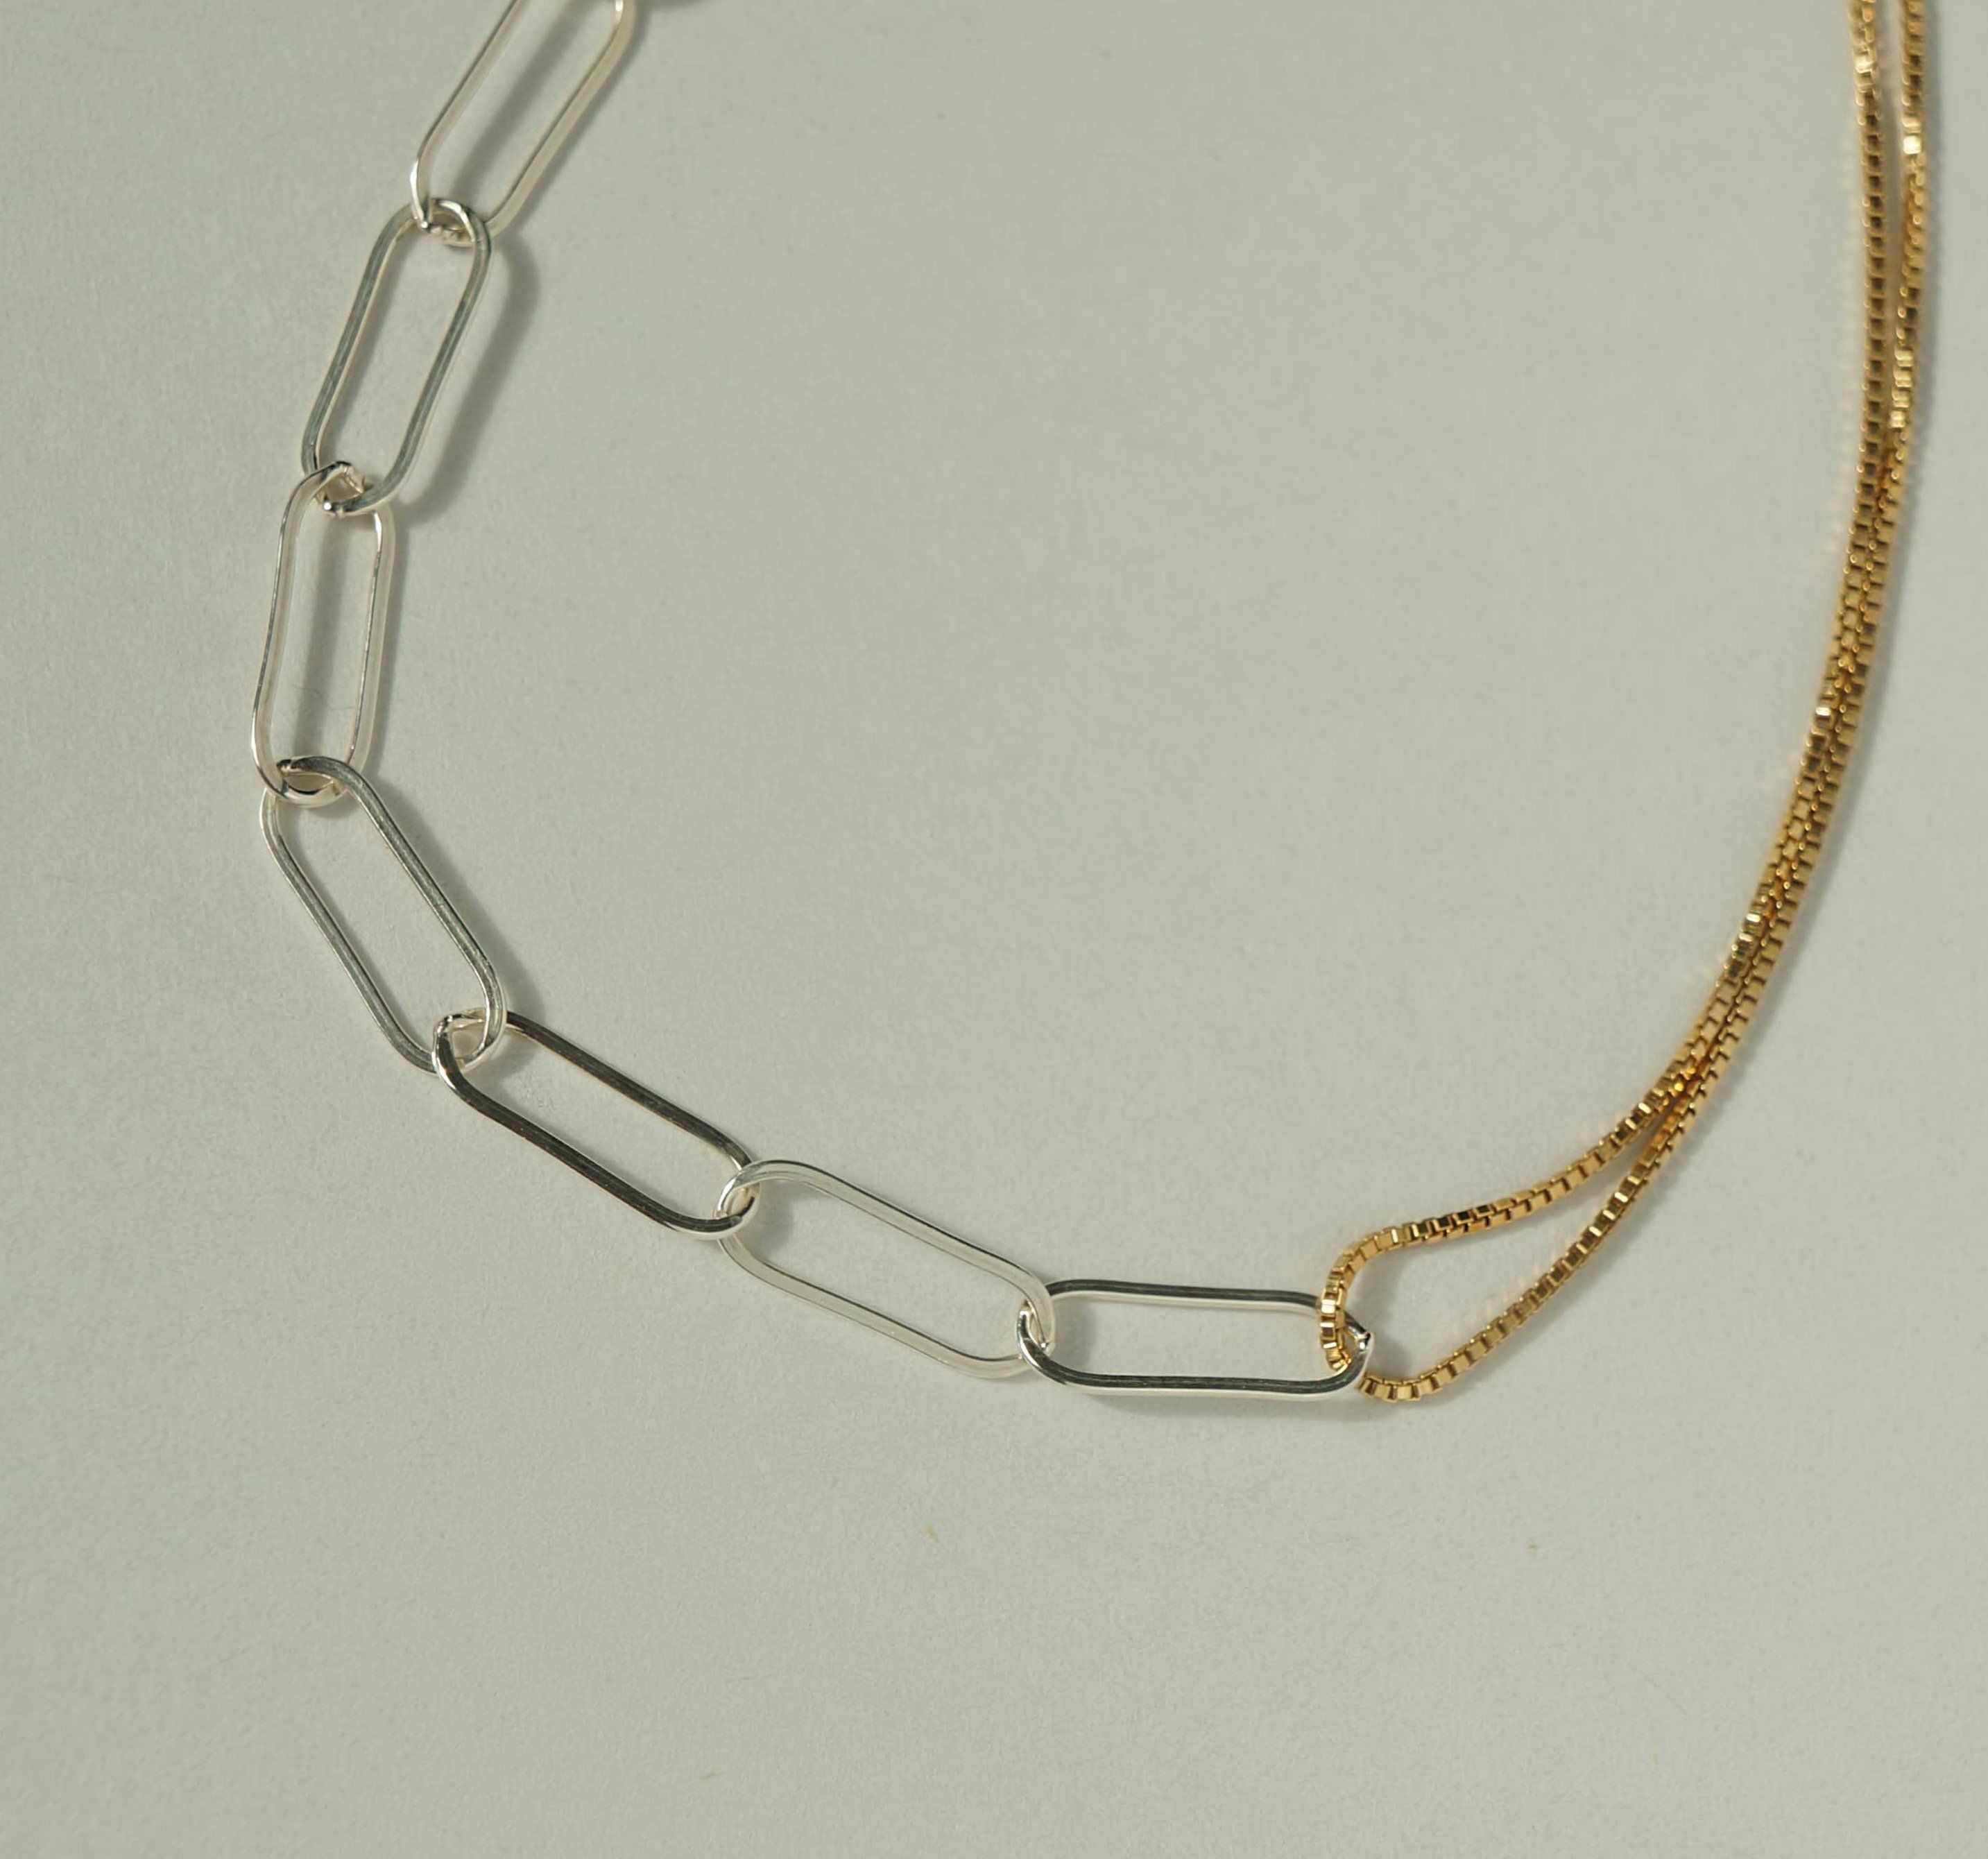 Isabella Necklace by KOZAKH. A 14 to 16 inch adjustable length combo chain necklace with gold box chain and silver paperclip chain. The Flat Link Chain is in Sterling Silver chain and the 1mm Box chain is in 14k Gold Filled.